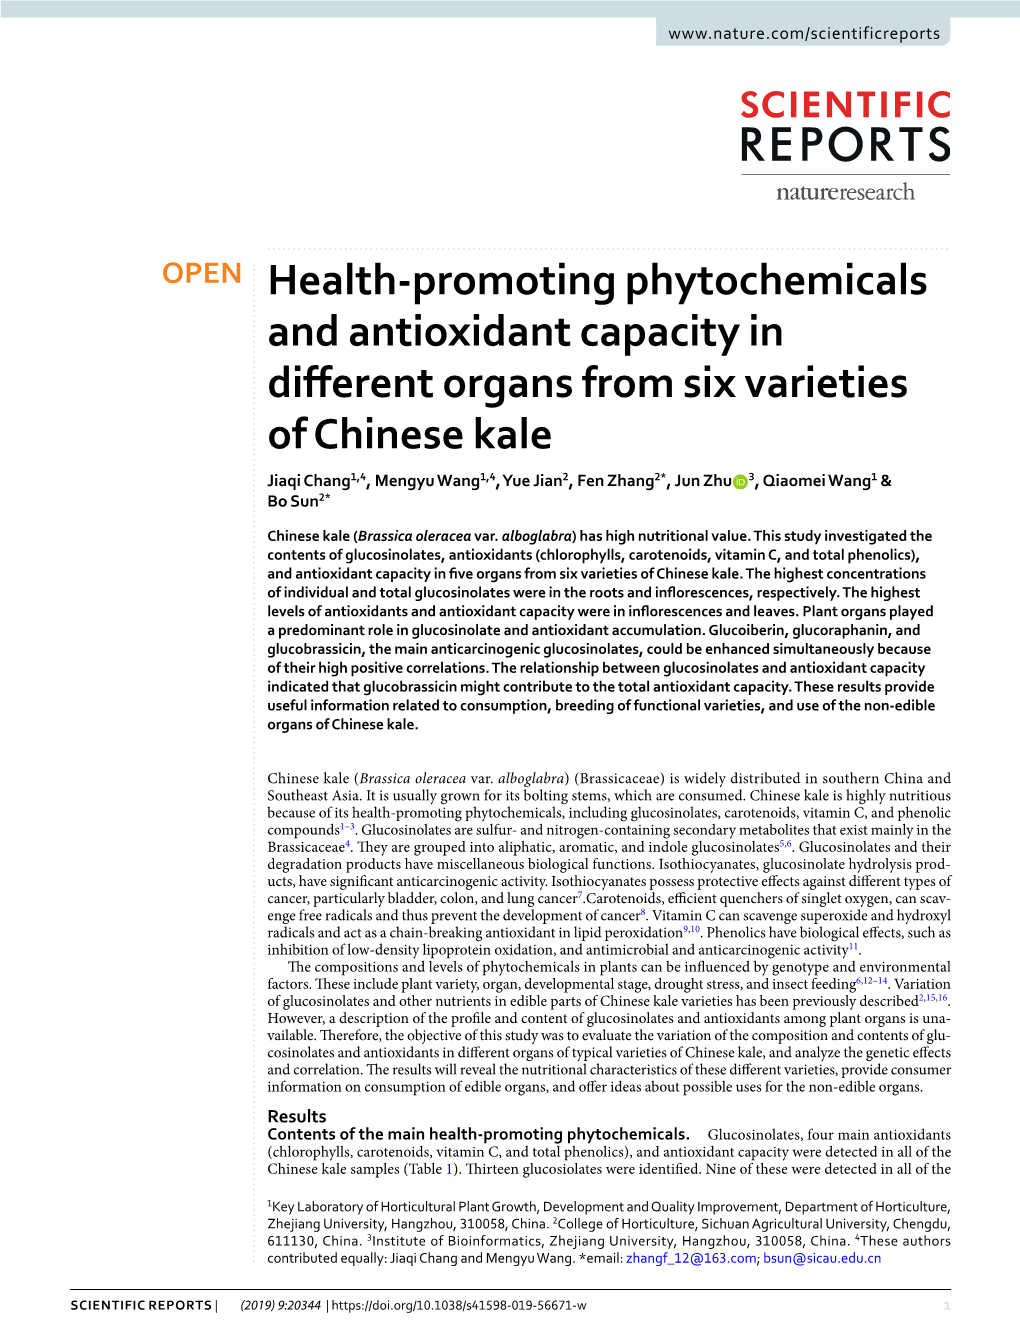 Health-Promoting Phytochemicals and Antioxidant Capacity in Different